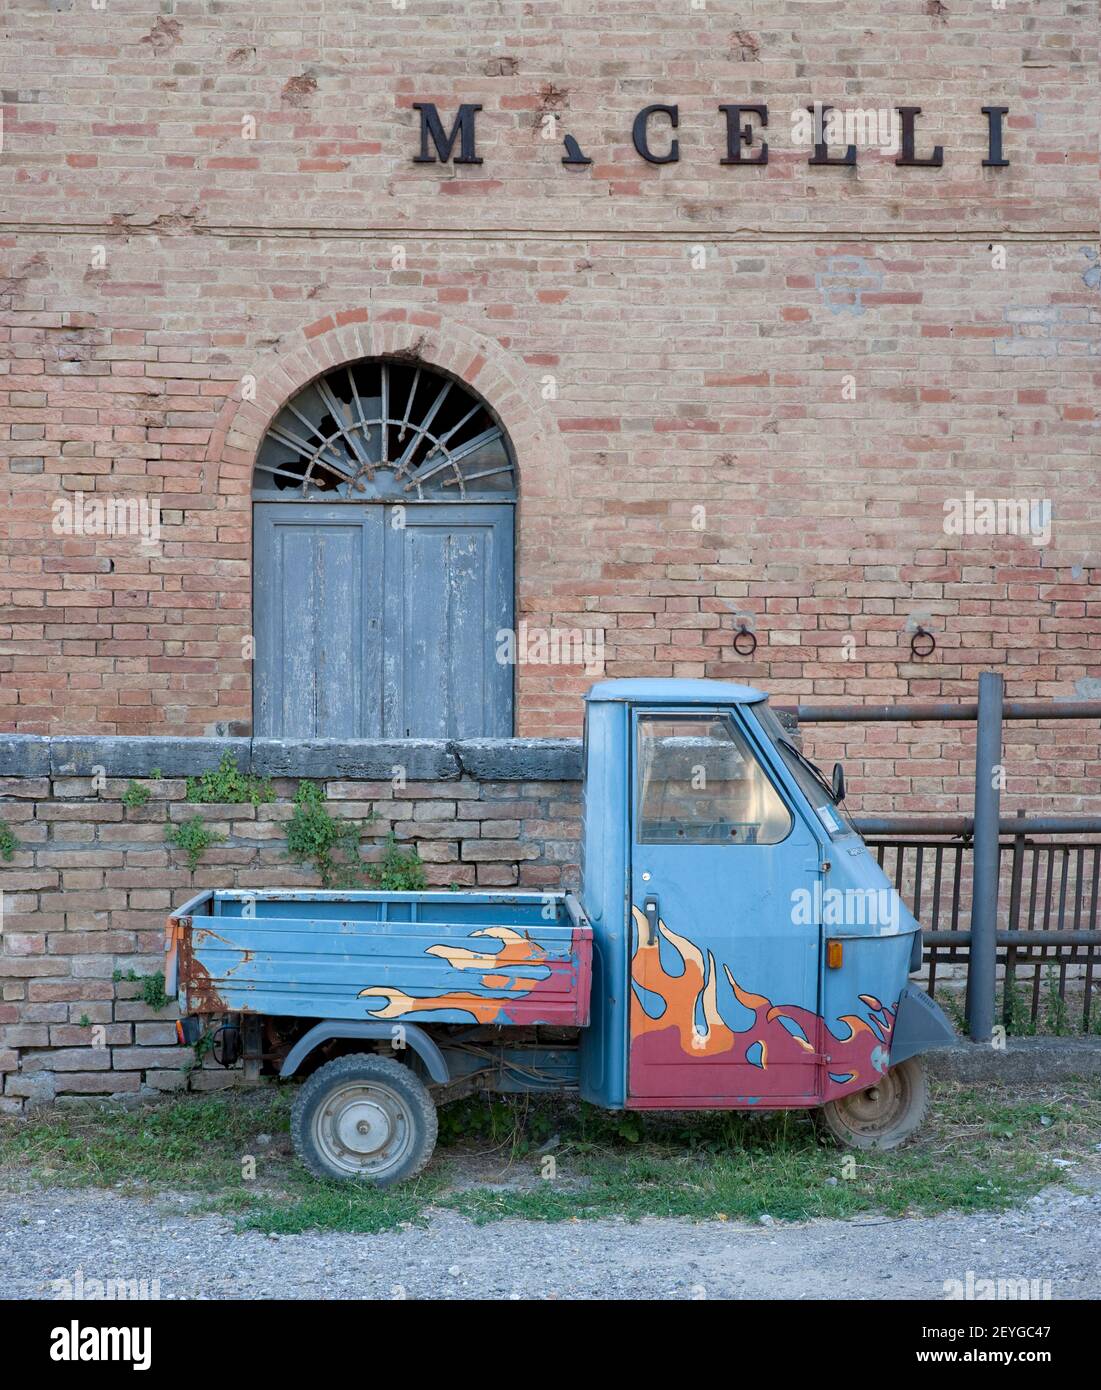 old Piaggio Ape (bee) with flames painted on its side in front of old factory Tuscany, near Buonconvento,Italy, alter Piaggio Ape (Biene) vor Fabrik Stock Photo